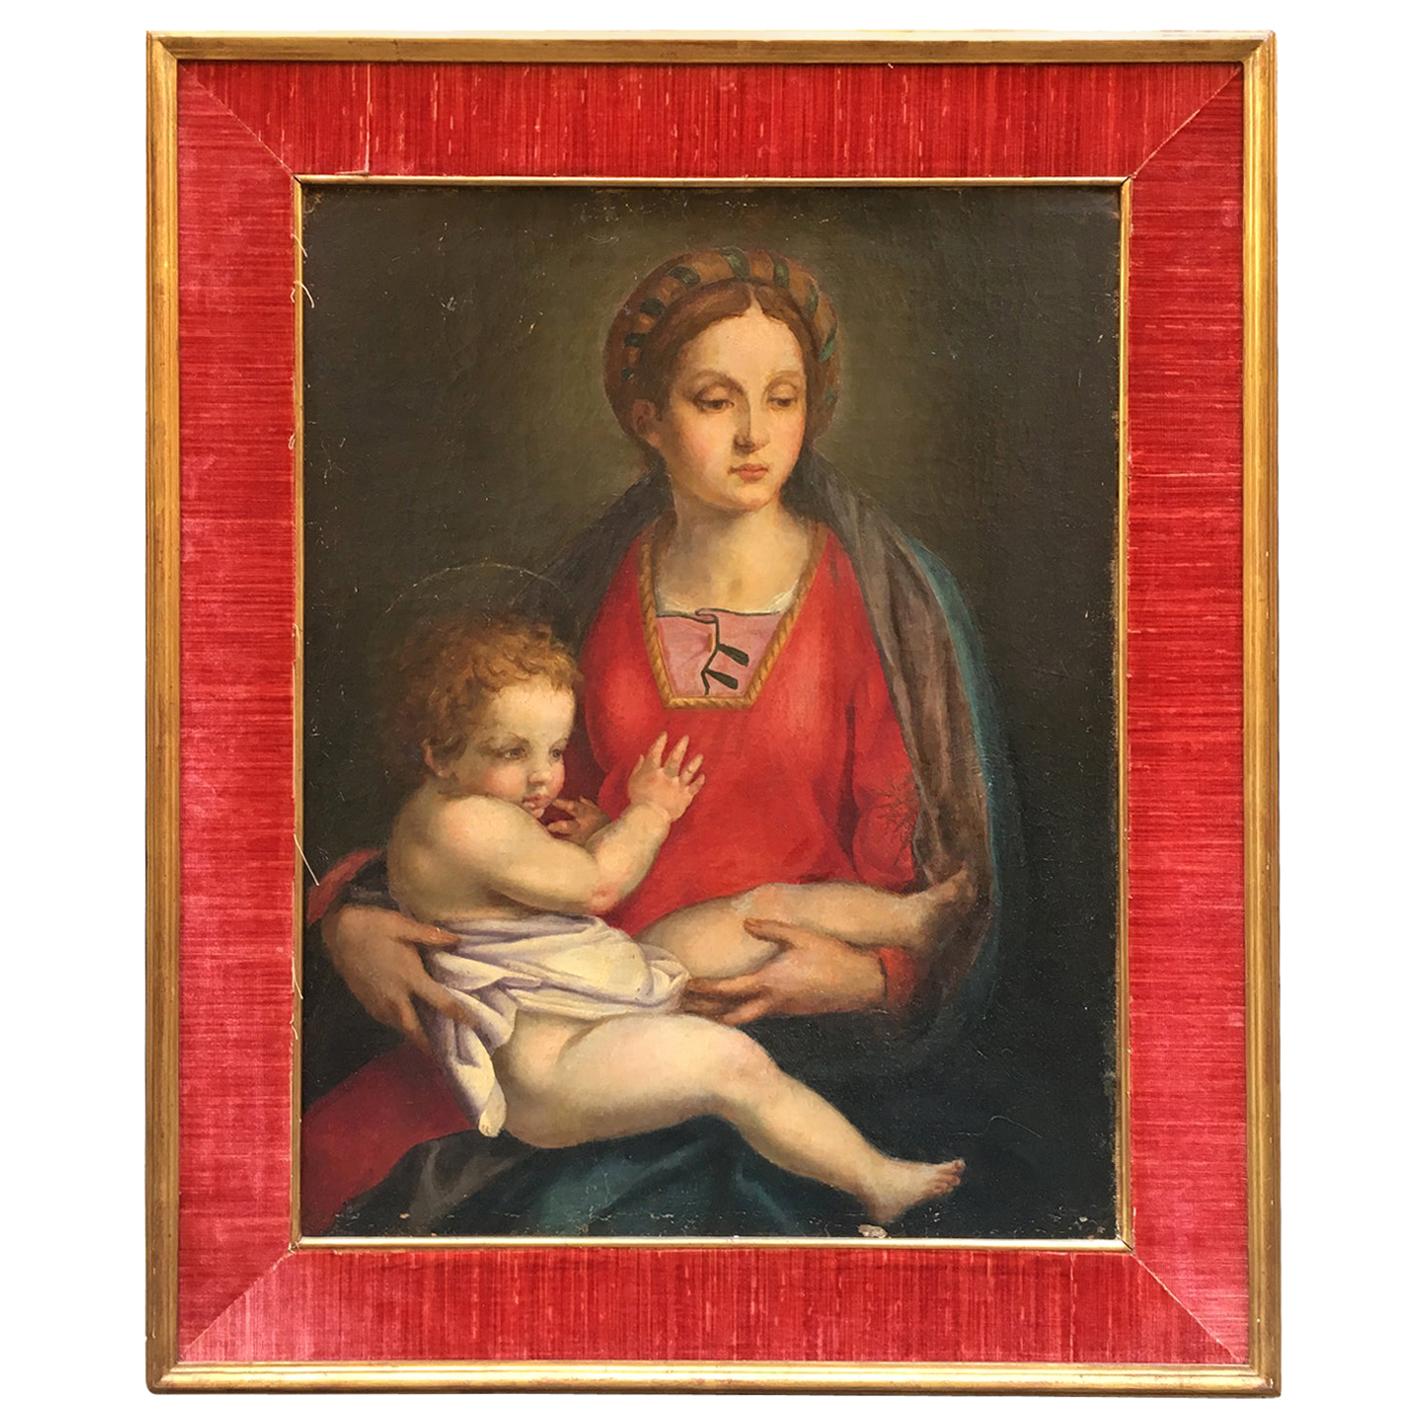 Late 19th Century Italian Renaissance Oil on Canvas Painting "Virgin and Child" For Sale